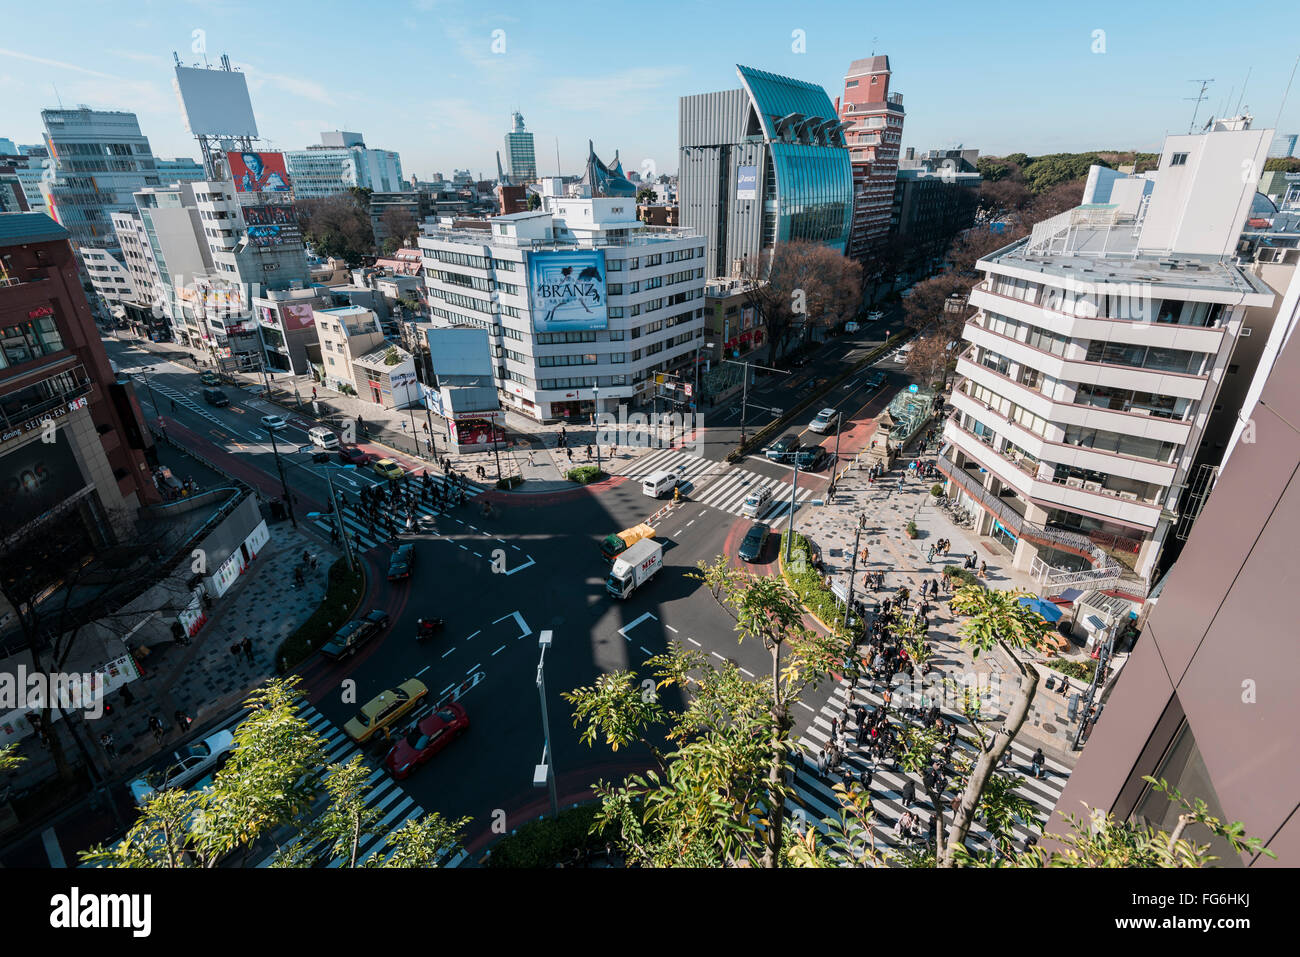 Tokyo, Japan - January 14, 2016:Aerial view of Omotesando district. Omotesandō is known as one of the foremost 'architectural sh Stock Photo